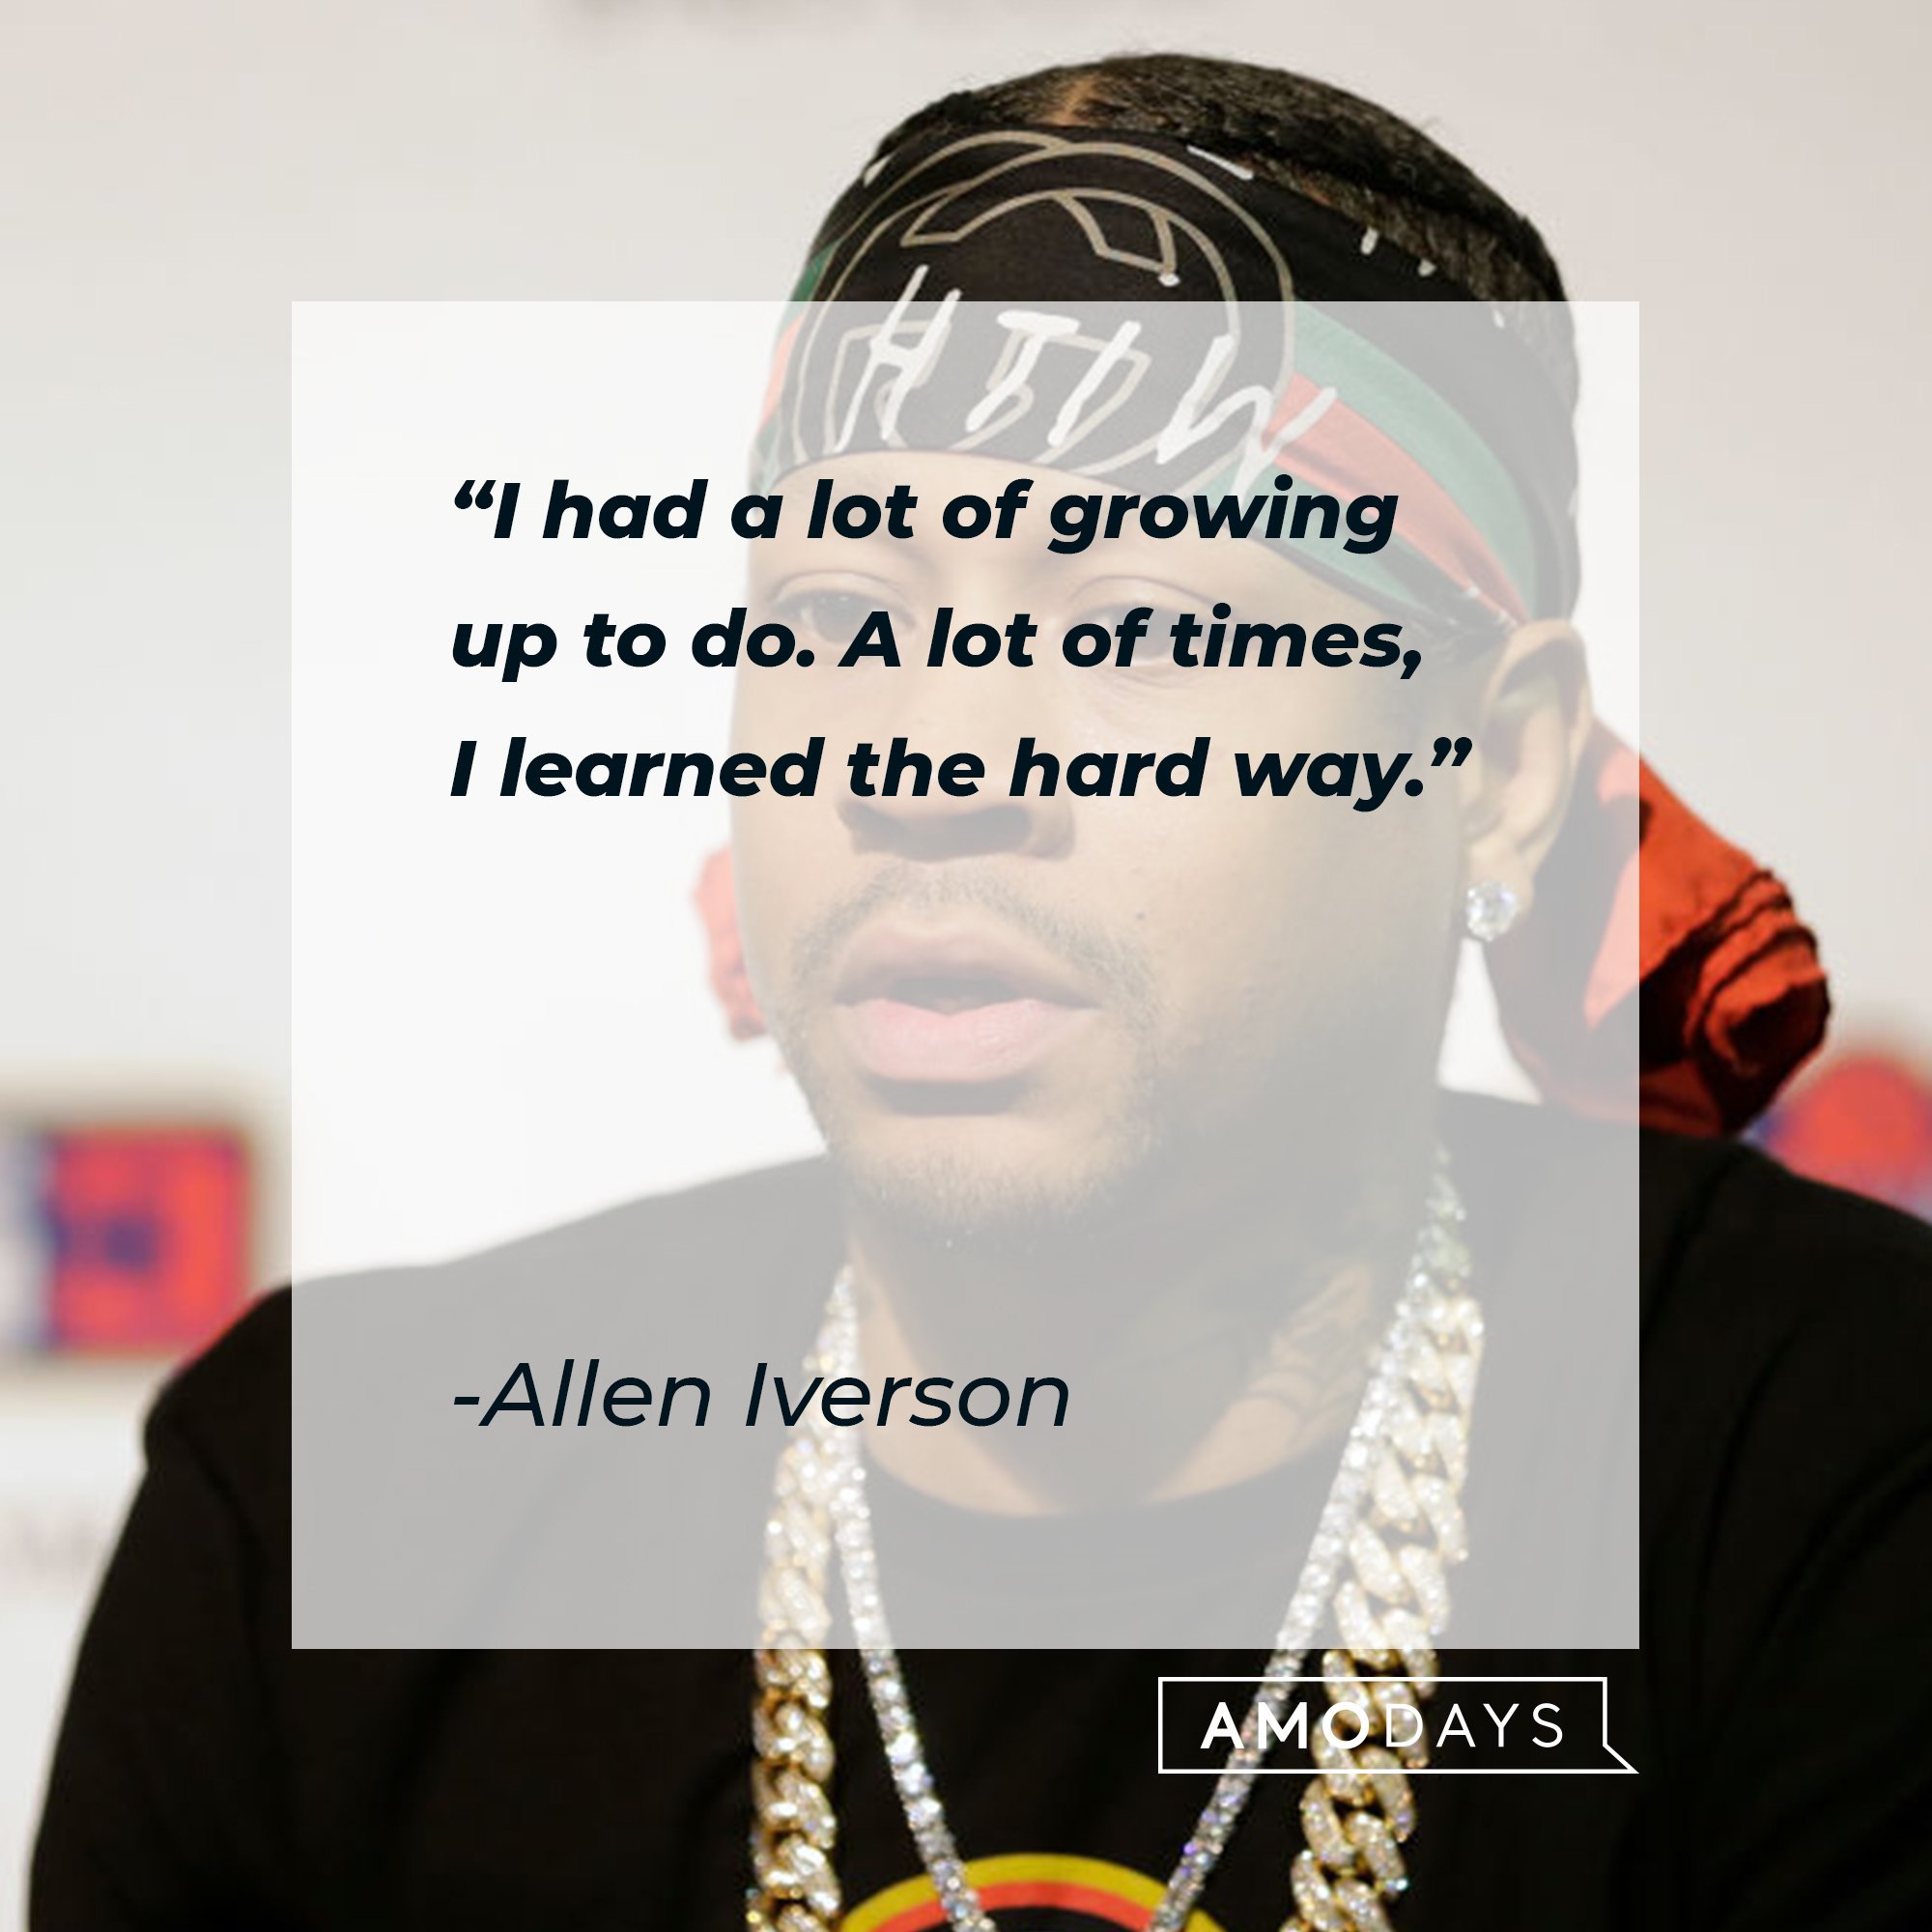 Allen Iverson's quote: "I had a lot of growing up to do. A lot of times, I learned the hard way." | Image: AmoDays